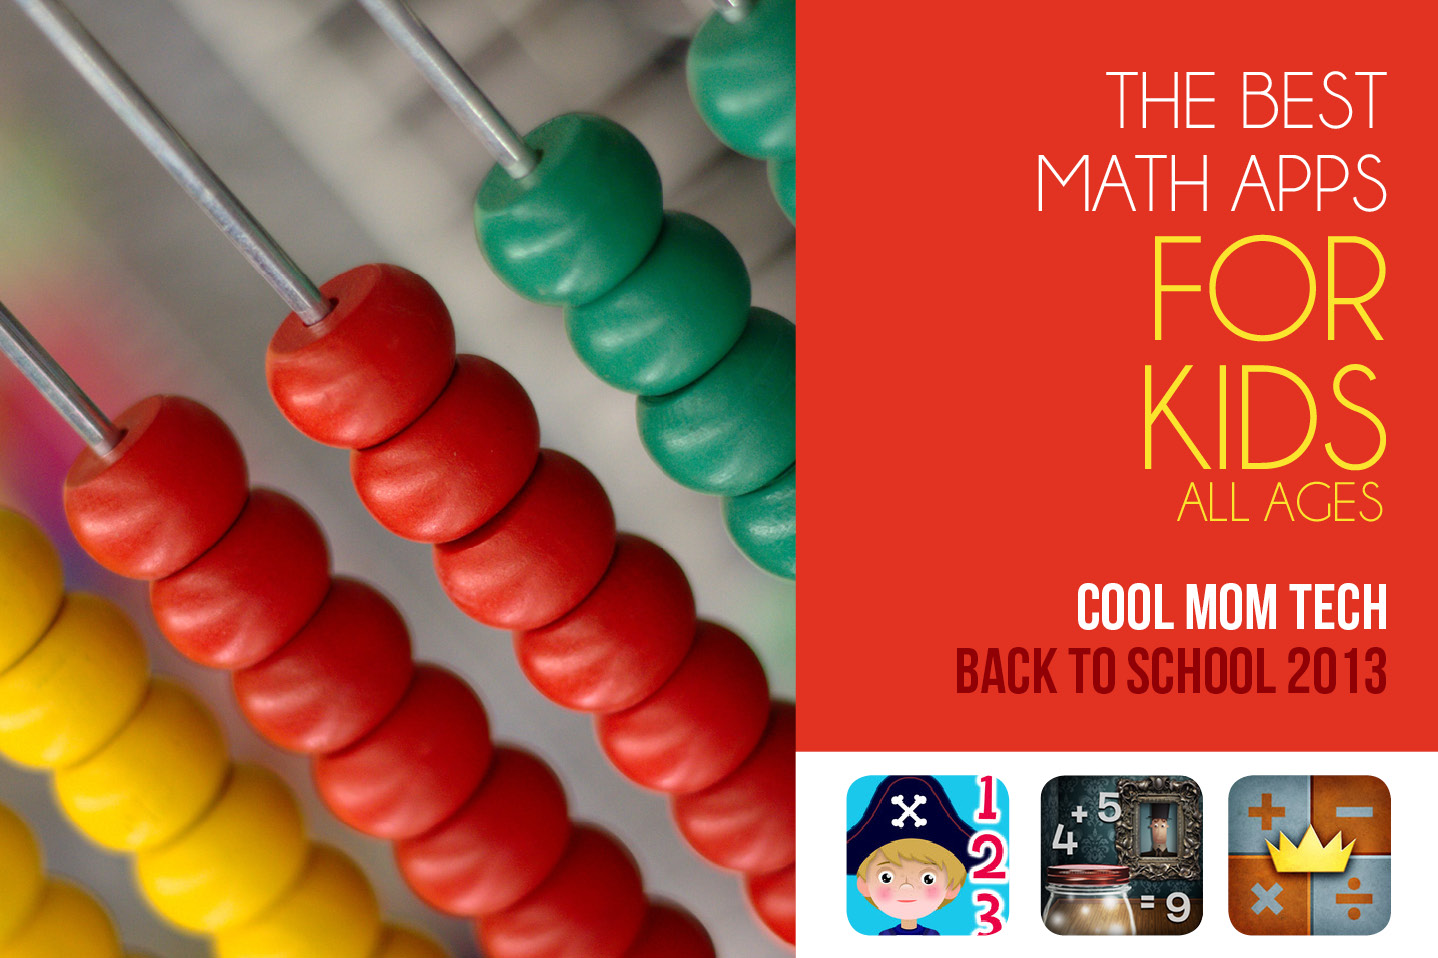 The best math apps for kids: Back to School Tech Guide 2013